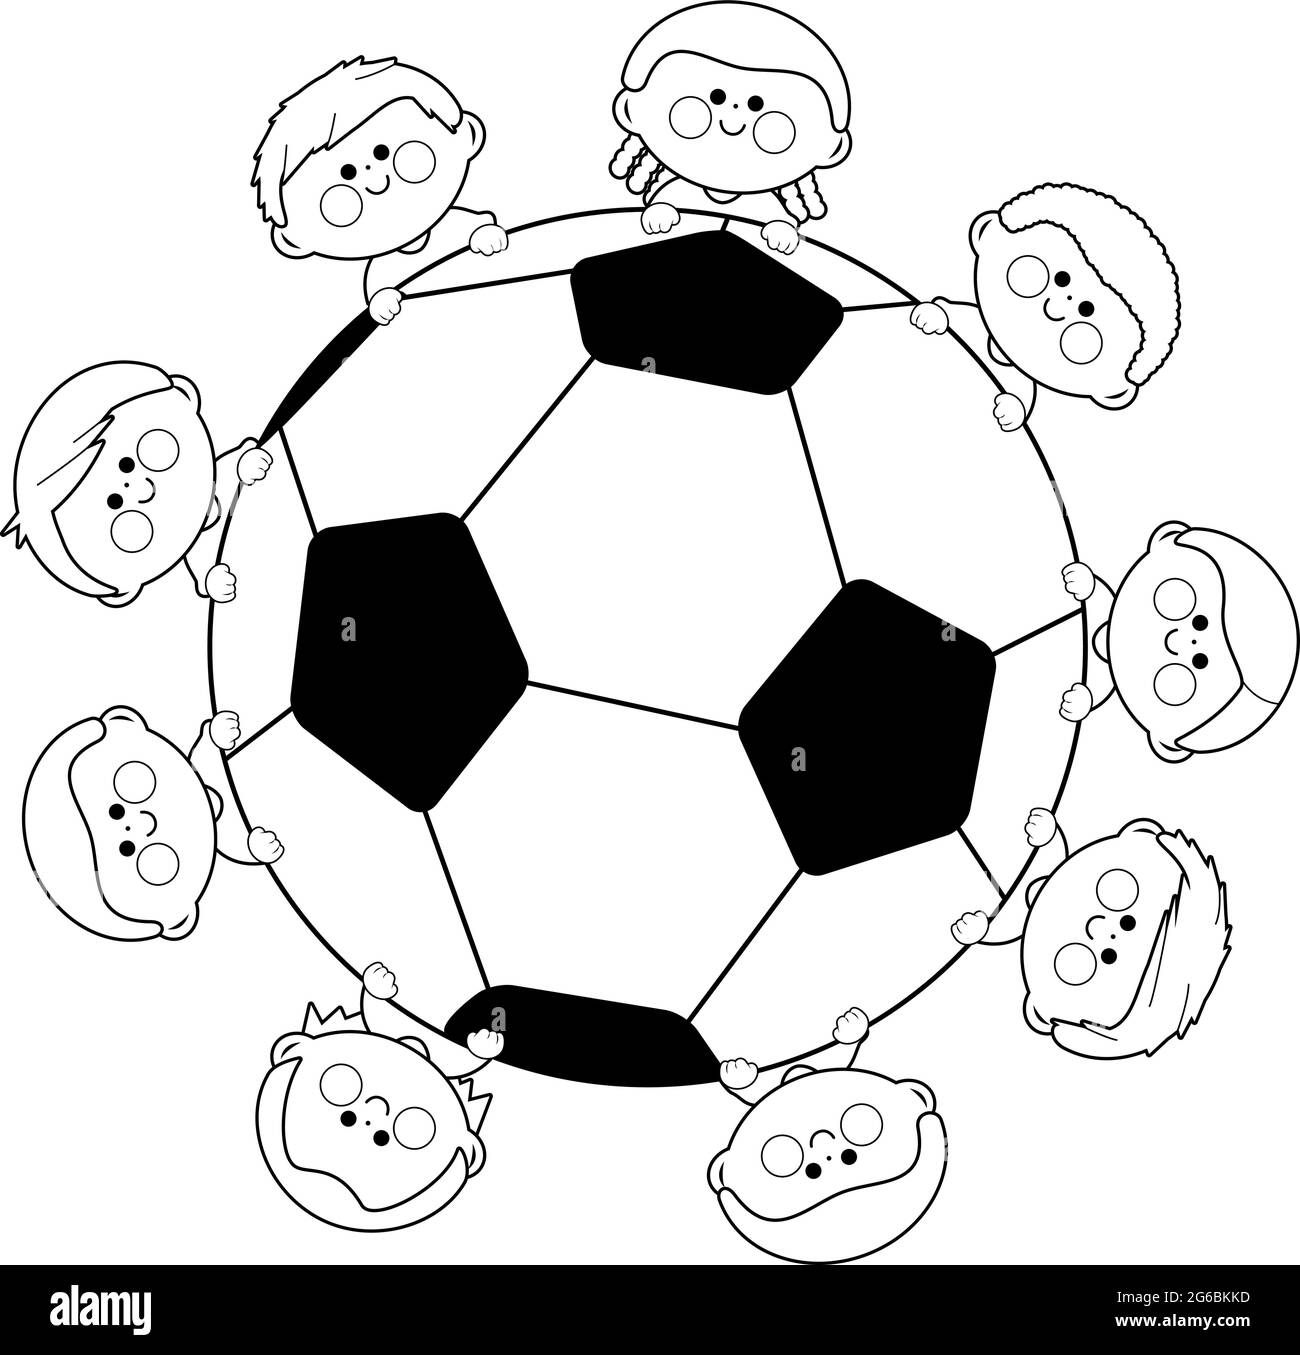 kids playing soccer clip art black and white